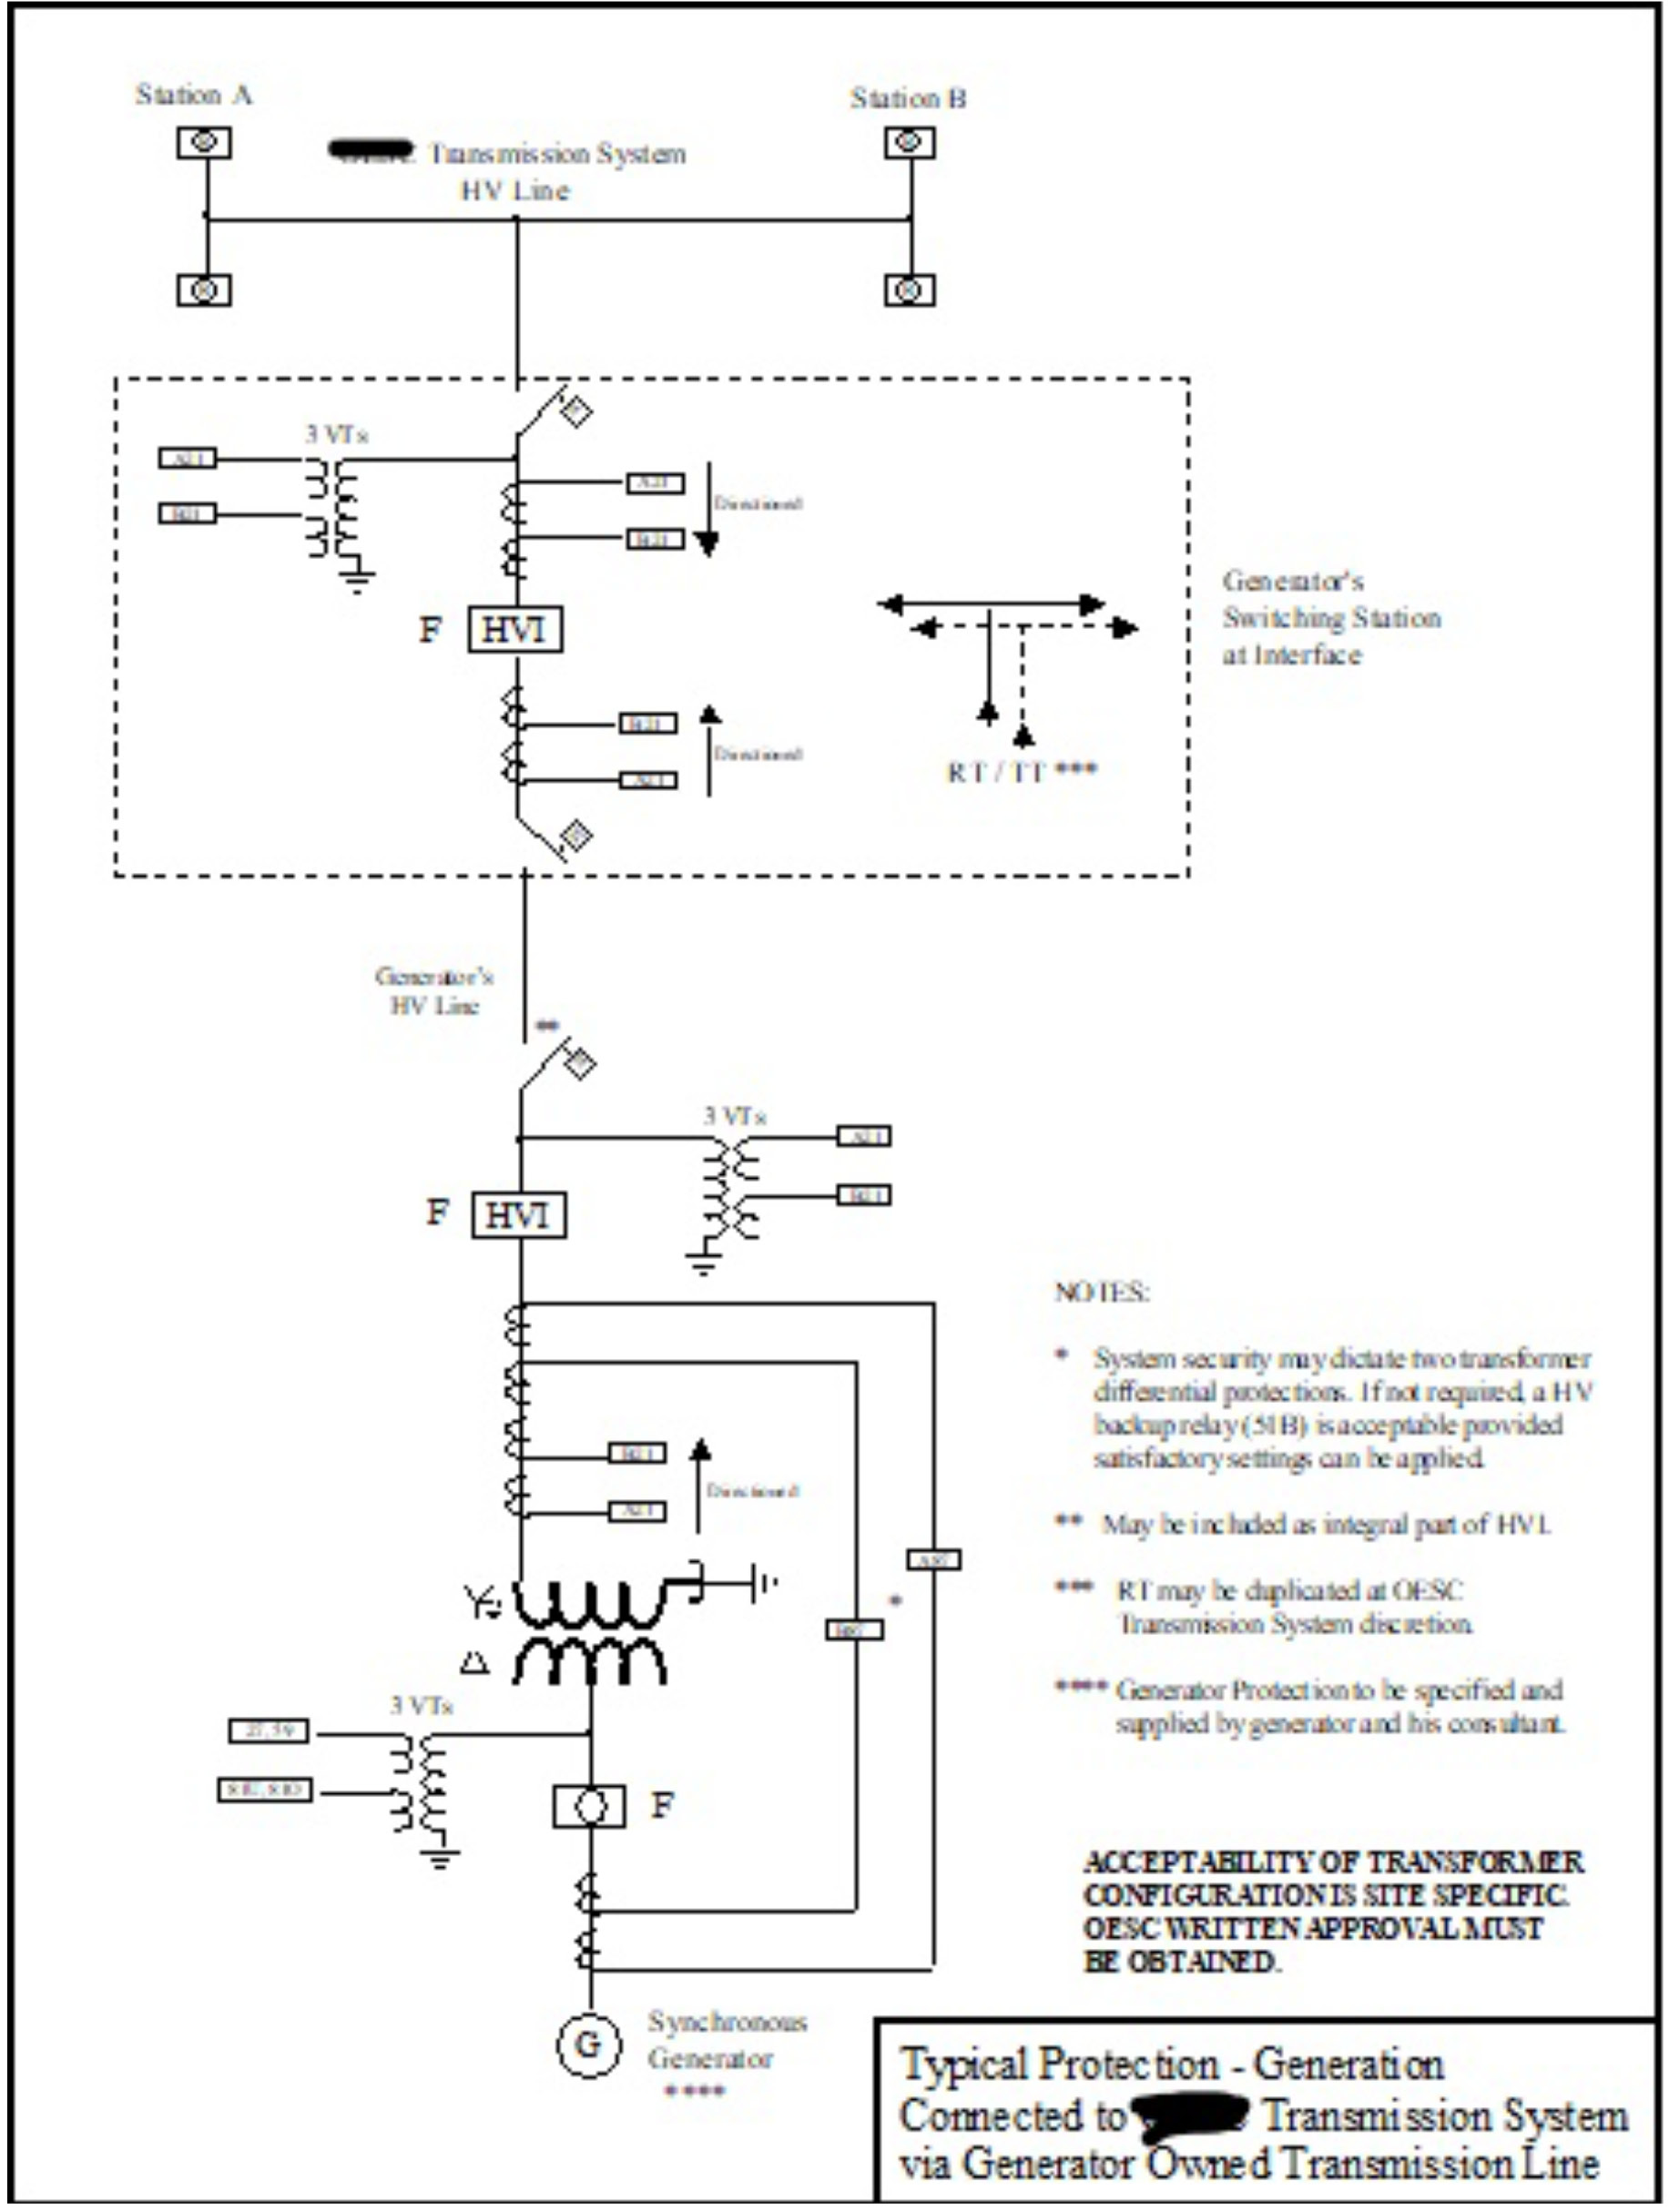 Diagram identifying the typical generator-owned transmission line protection requirement.